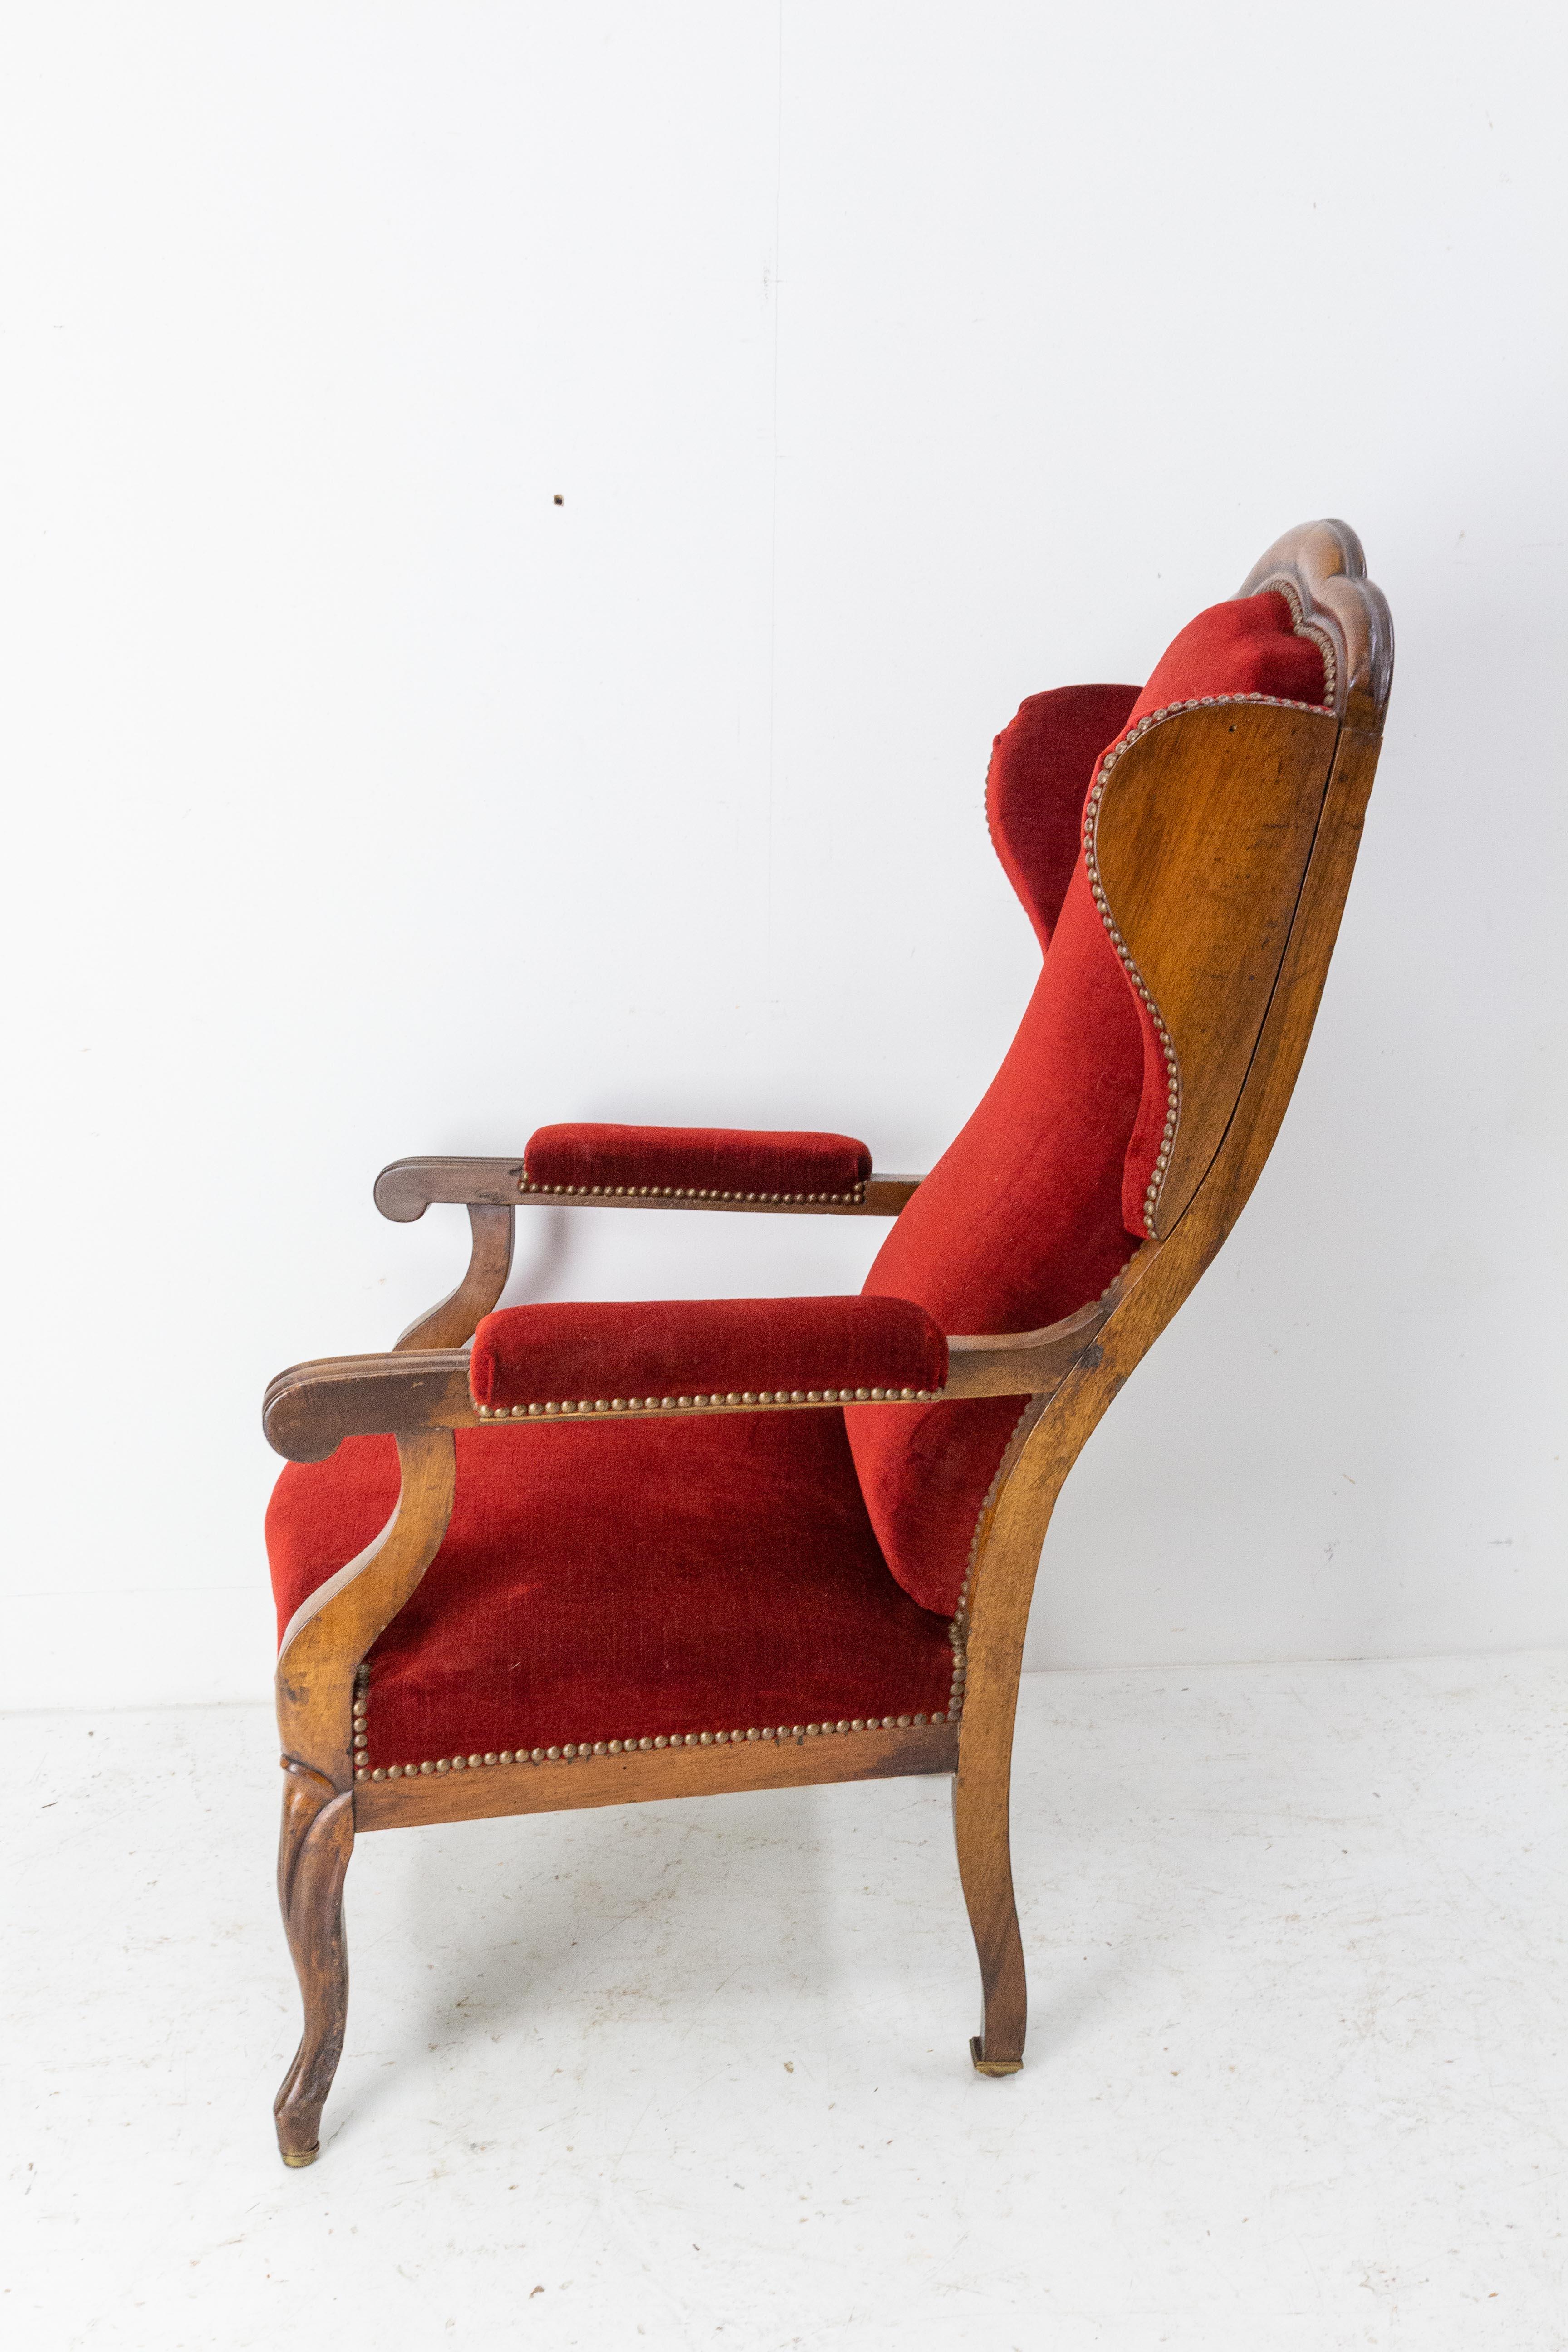 Upholstery 19th Century Voltaire Open Armchair French Louis Philippe Fauteuil For Sale